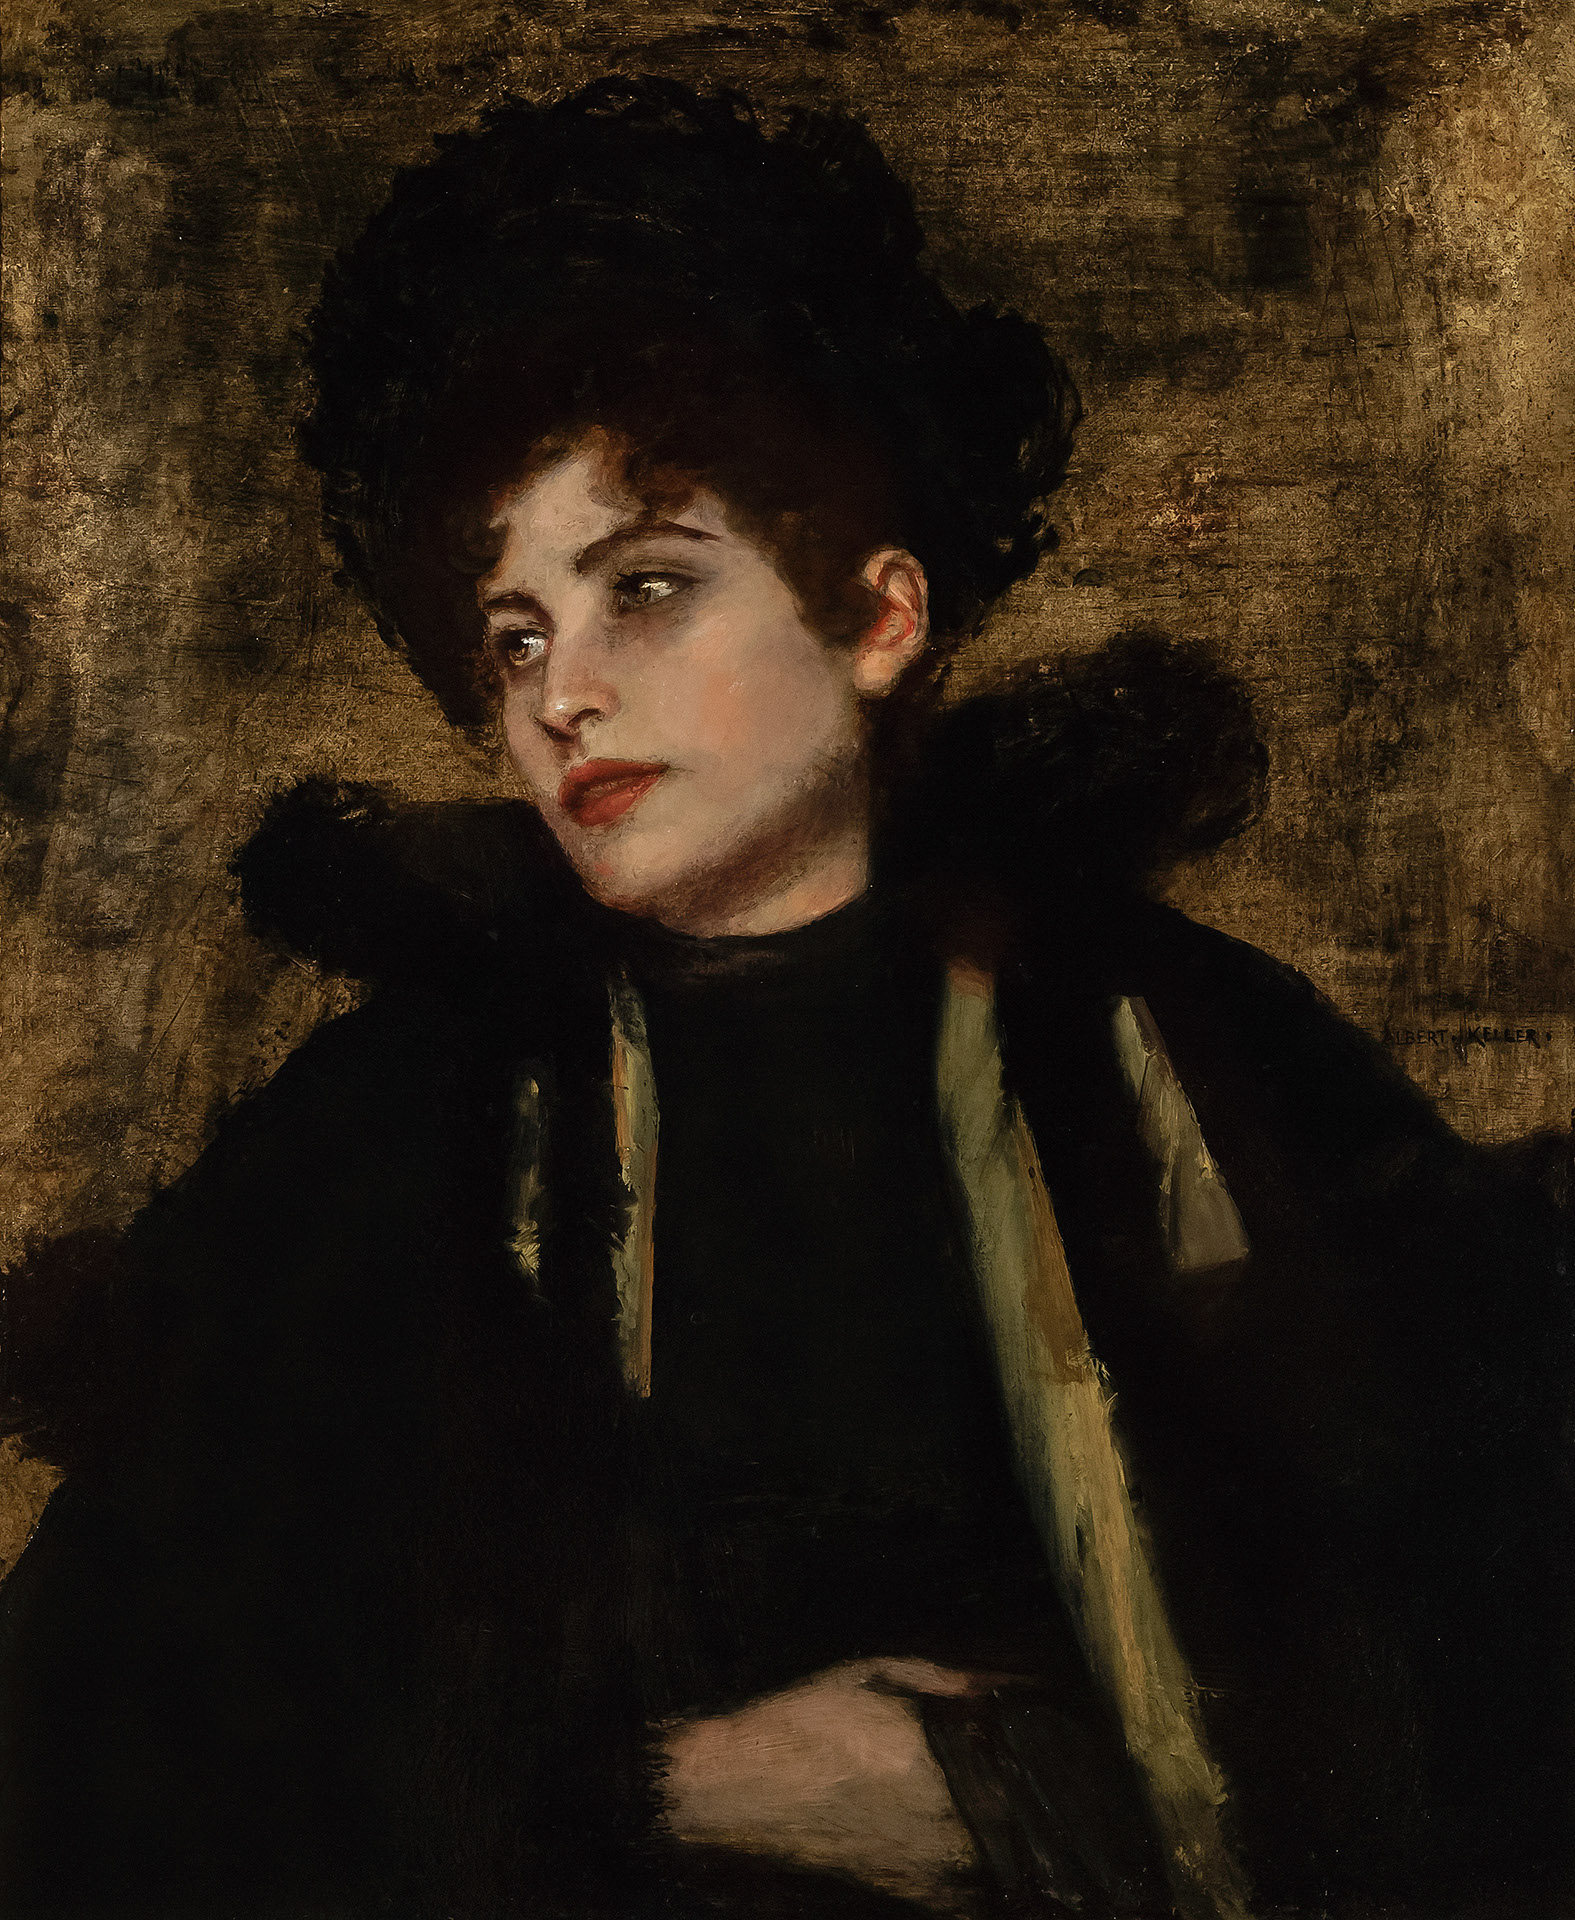 Portrait of Lily disgeistes